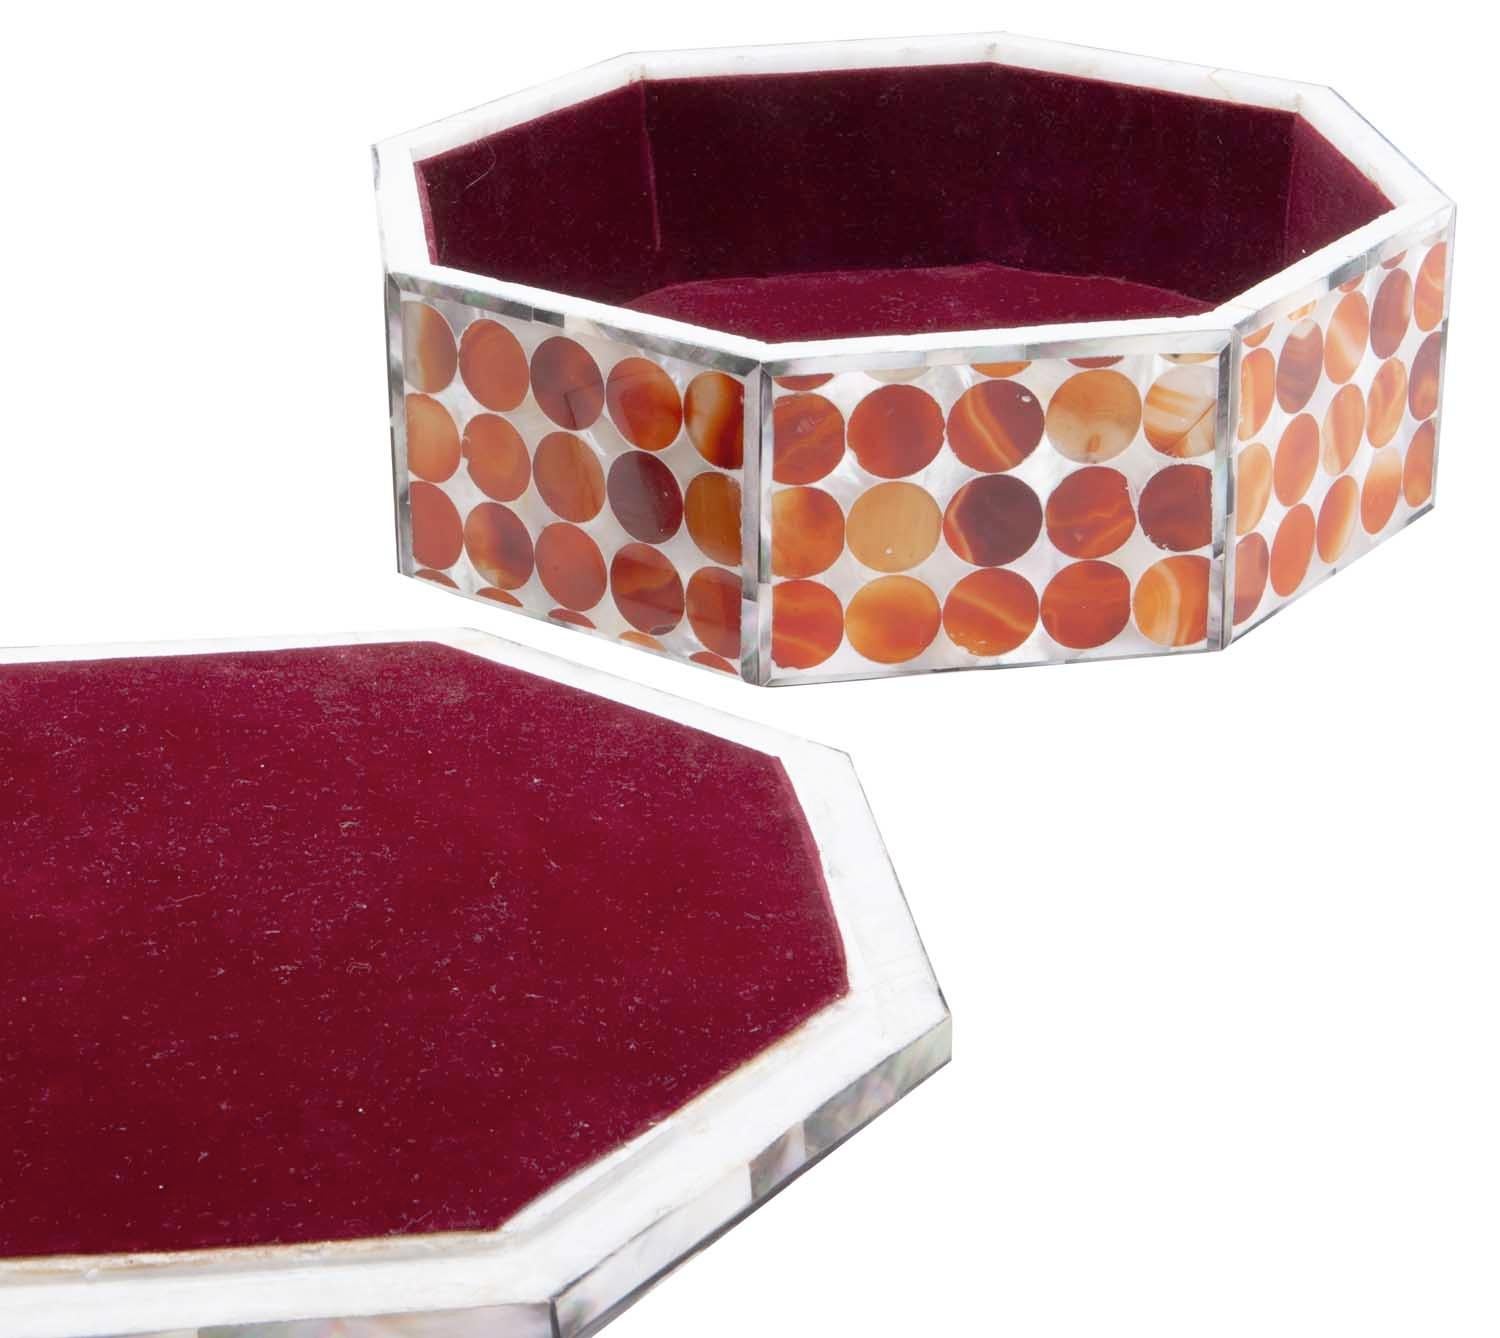 White Makrana marble, used to build the Taj Mahal, from Indian is the densest marble on the planet. This handmade octagonal shaped makrana marble box has rich abalone and carnelian inlay in orange and reddish tones. Plush red velvet lines the